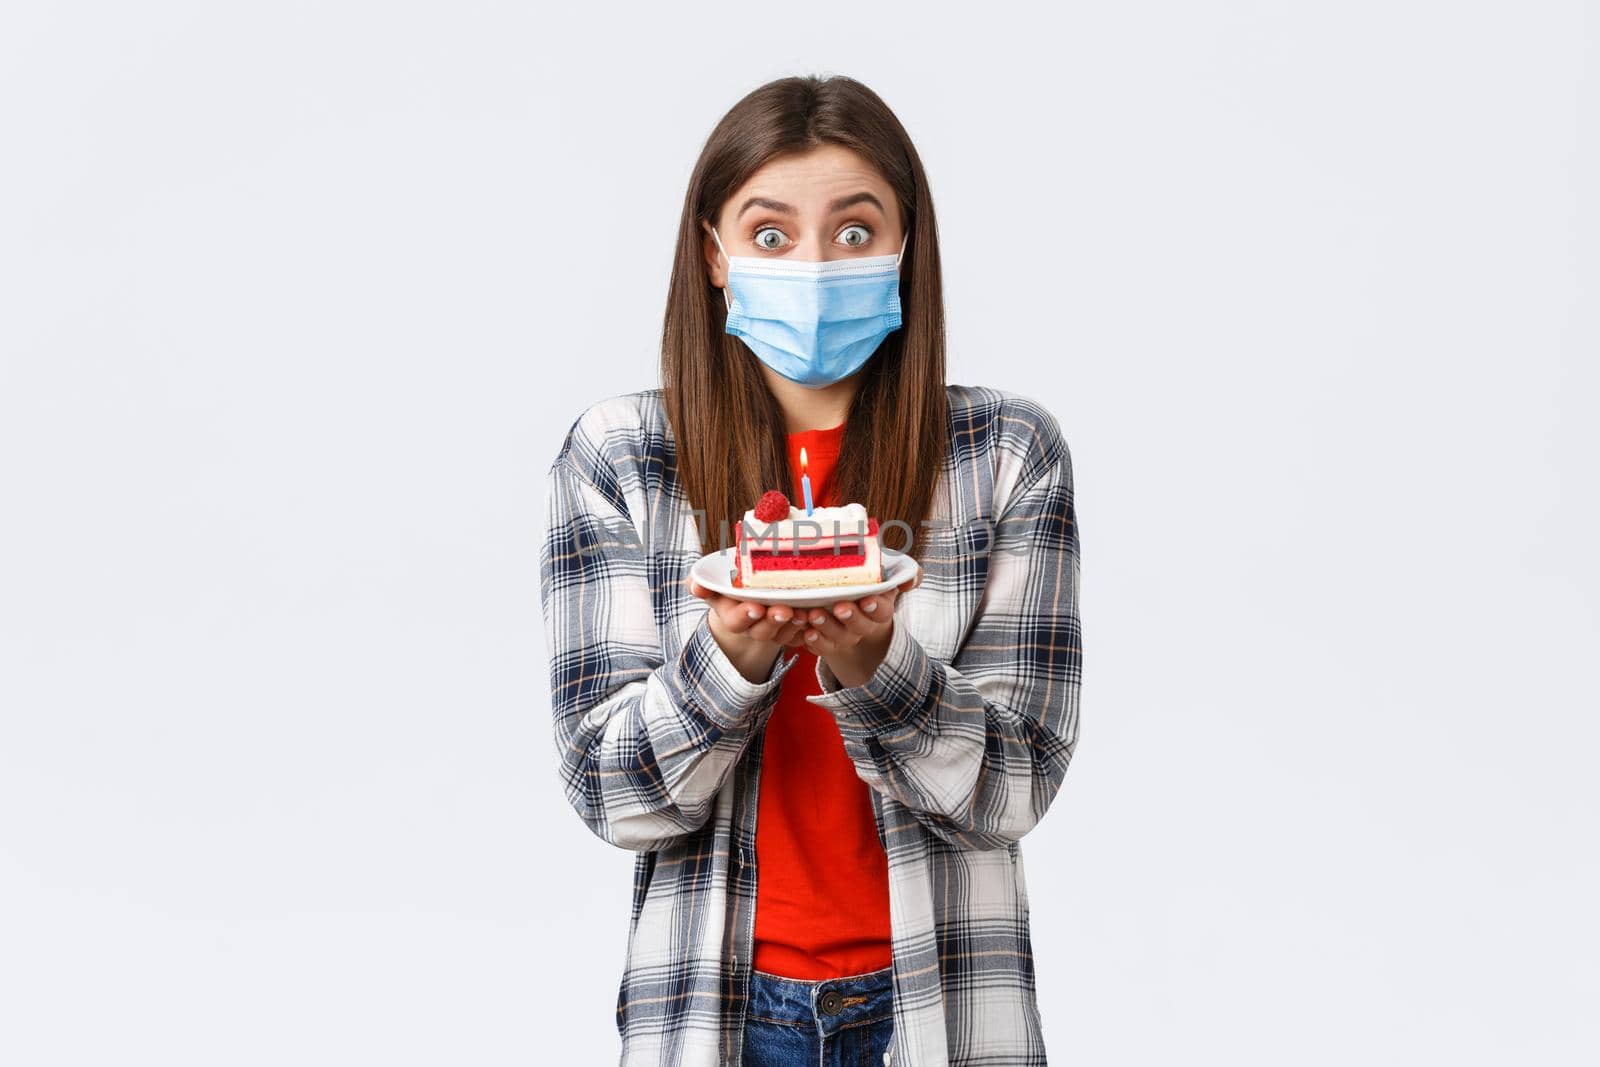 Coronavirus outbreak, lifestyle during social distancing and holidays celebration concept. Cute happy birthday girl making wish, wear medical mask, holding b-day cake, celebrating inside home by Benzoix